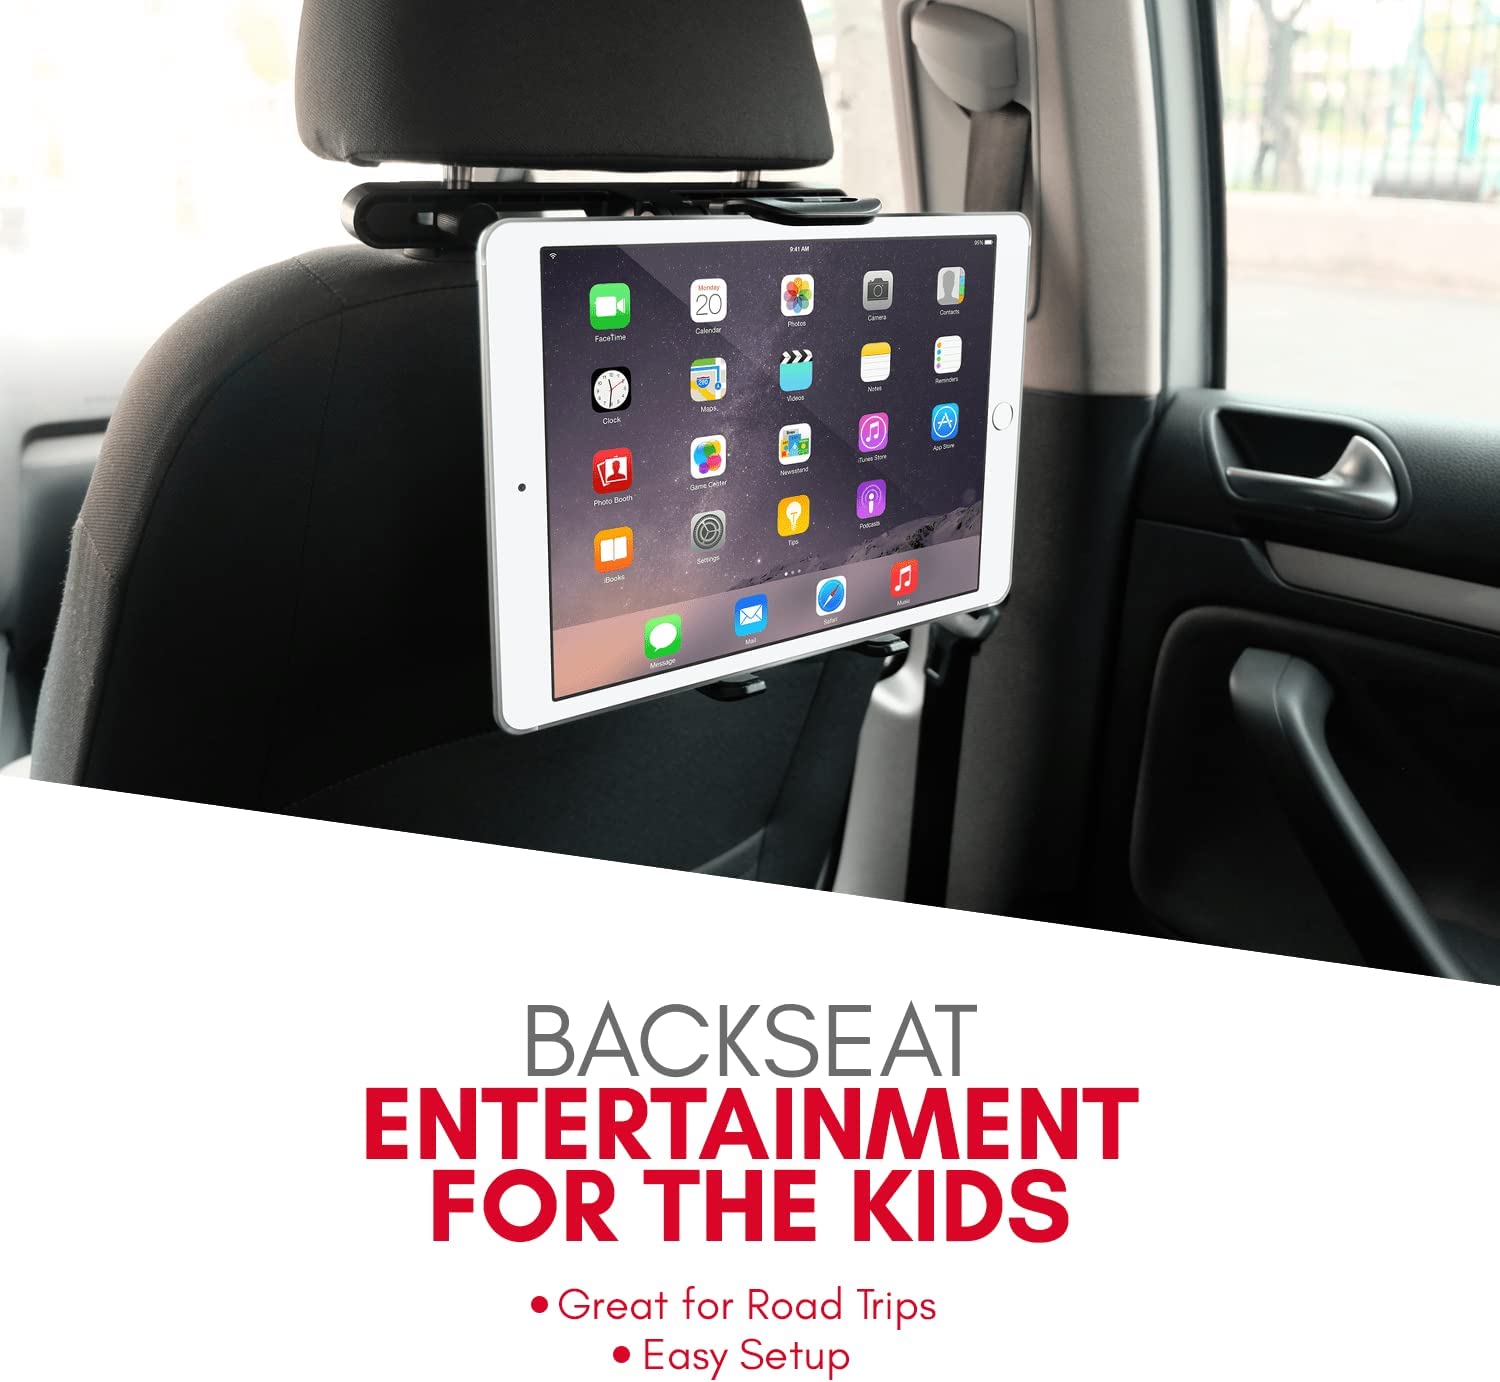 Macally Car Headrest Tablet Holder, Adjustable iPad Car Mount for Kids in Backseat, Compatible with Devices Such as iPad Pro Air Mini, Galaxy Tabs, And 7" to 10" Tablets and Cell Phones - Black - image 2 of 8